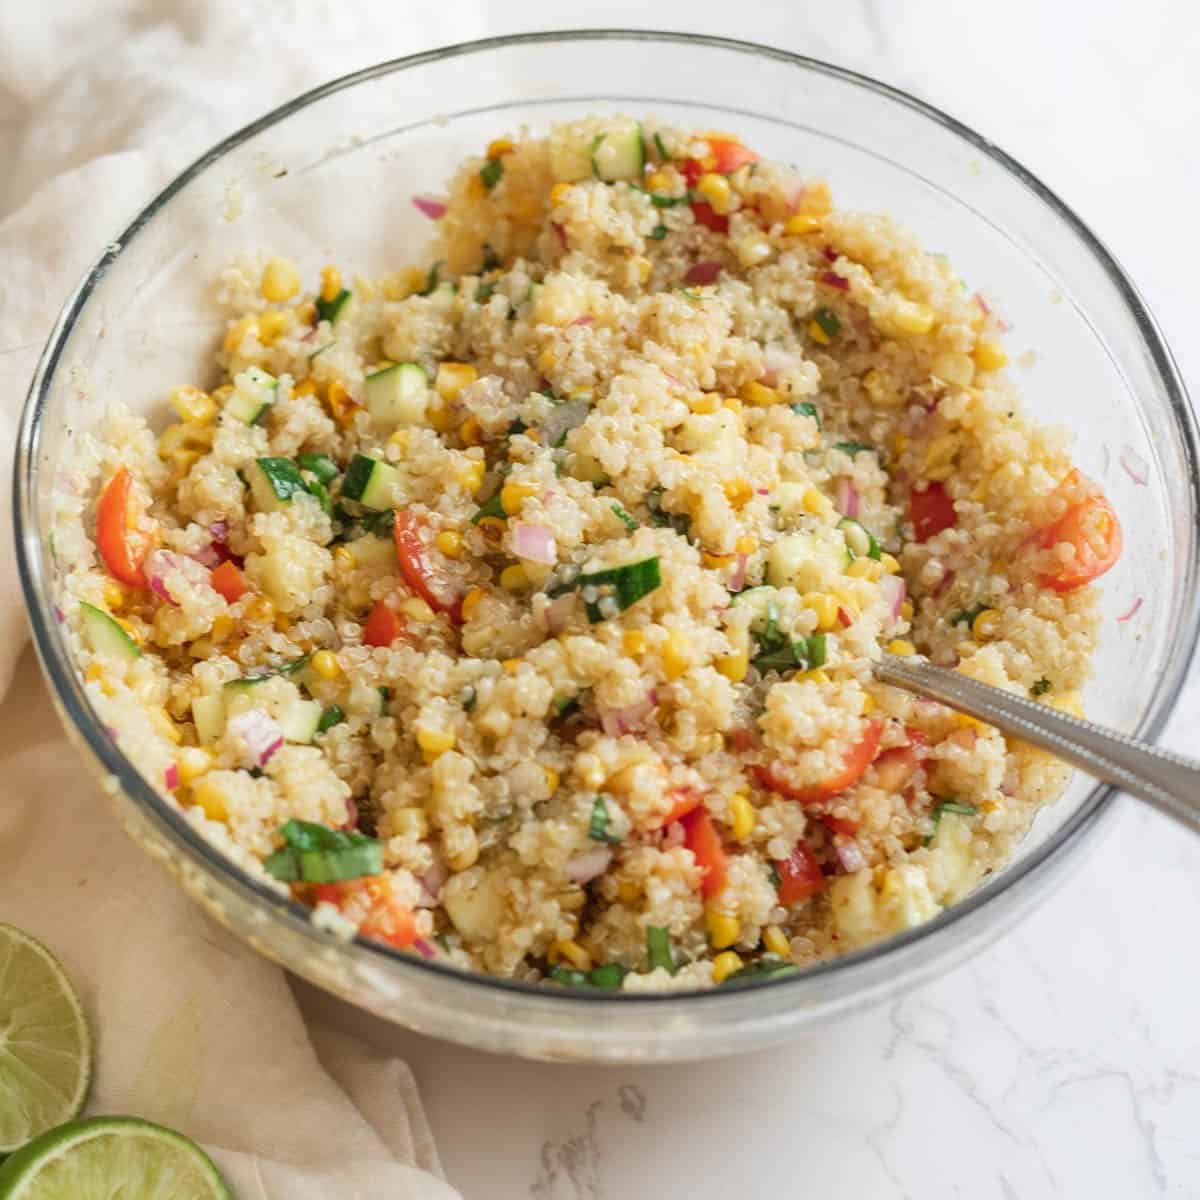 a clear glass bowl filled with quinoa and vegetables with a silver spoon and lime wedges